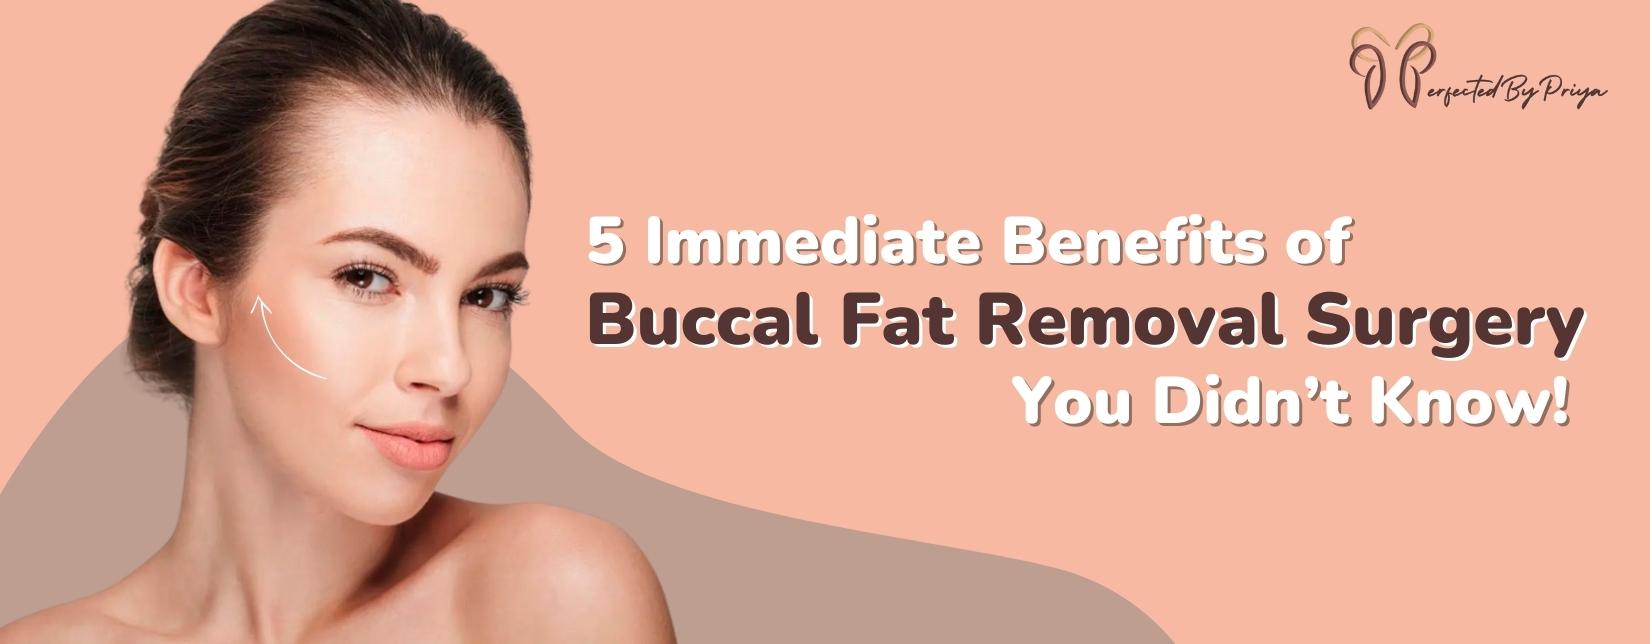 5 Immediate Benefits of Buccal Fat Removal Surgery You Didn't Know - Dr  Priya Bansal